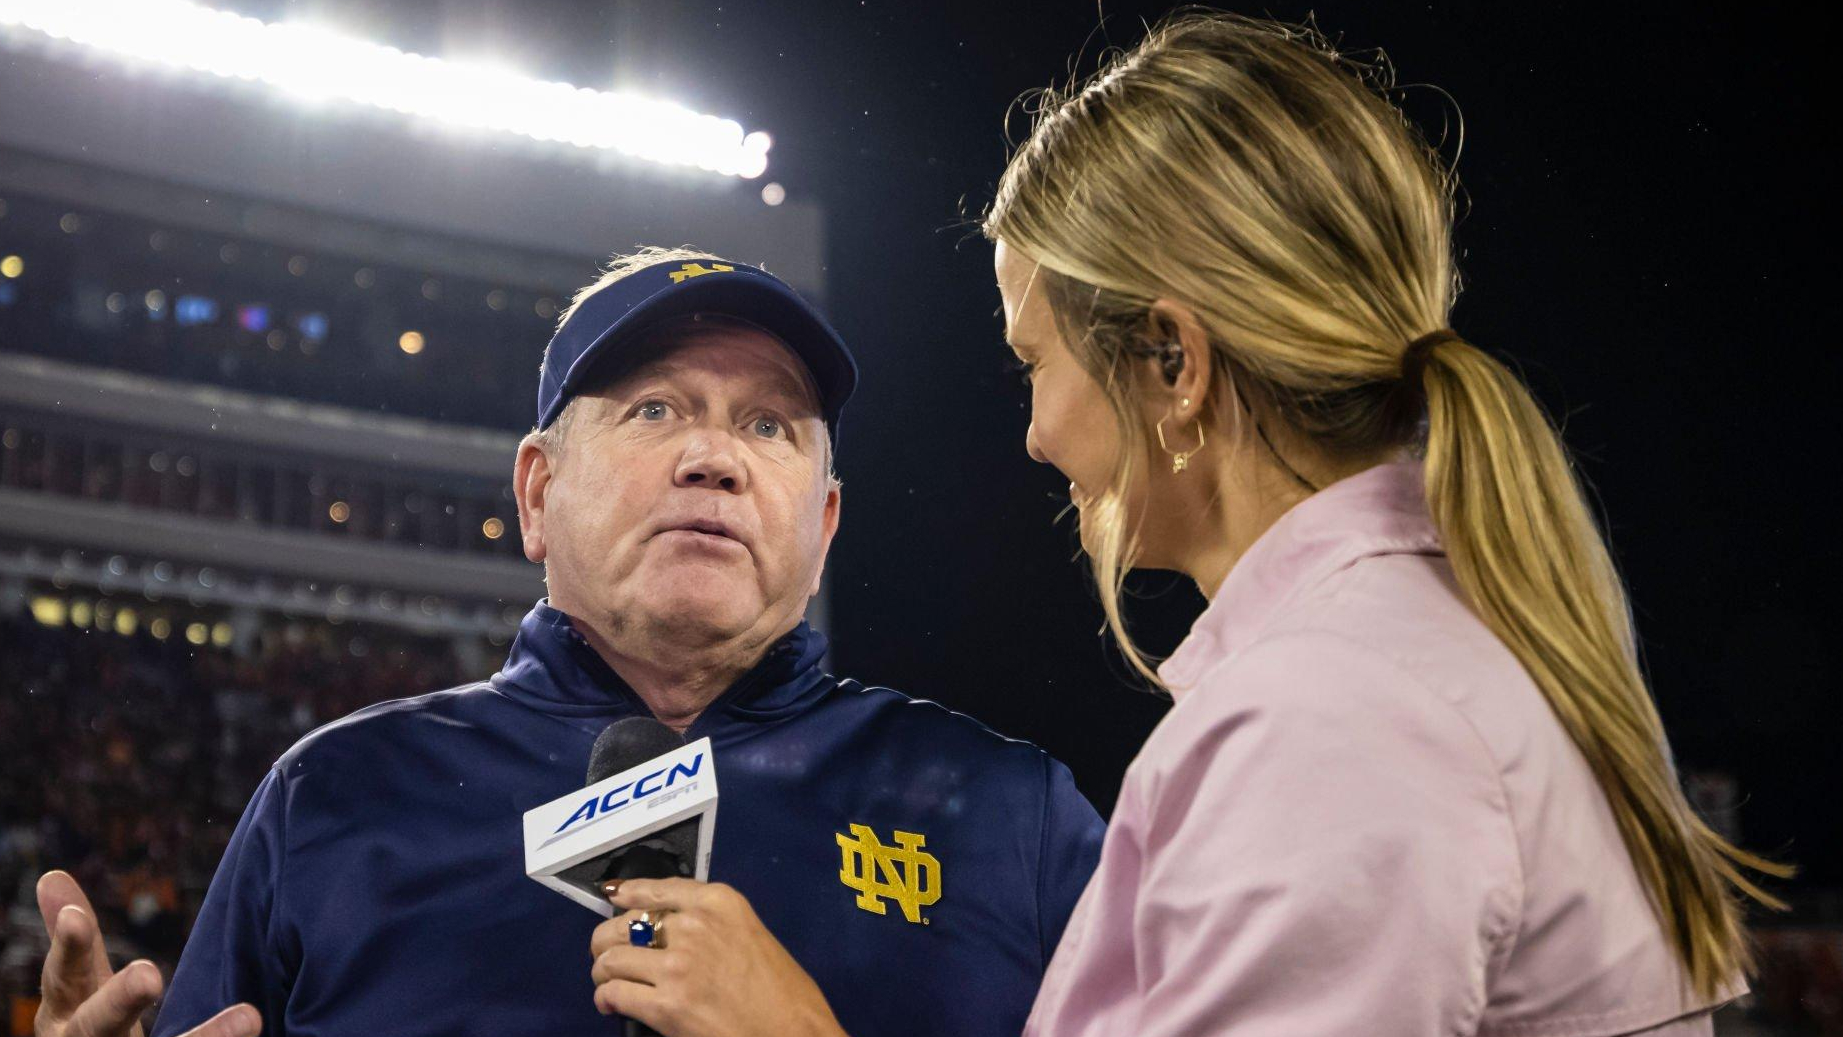 Former Notre Dame Fighting Irish head coach Brian Kelly is interviewed after the game against the Virginia Tech Hokies